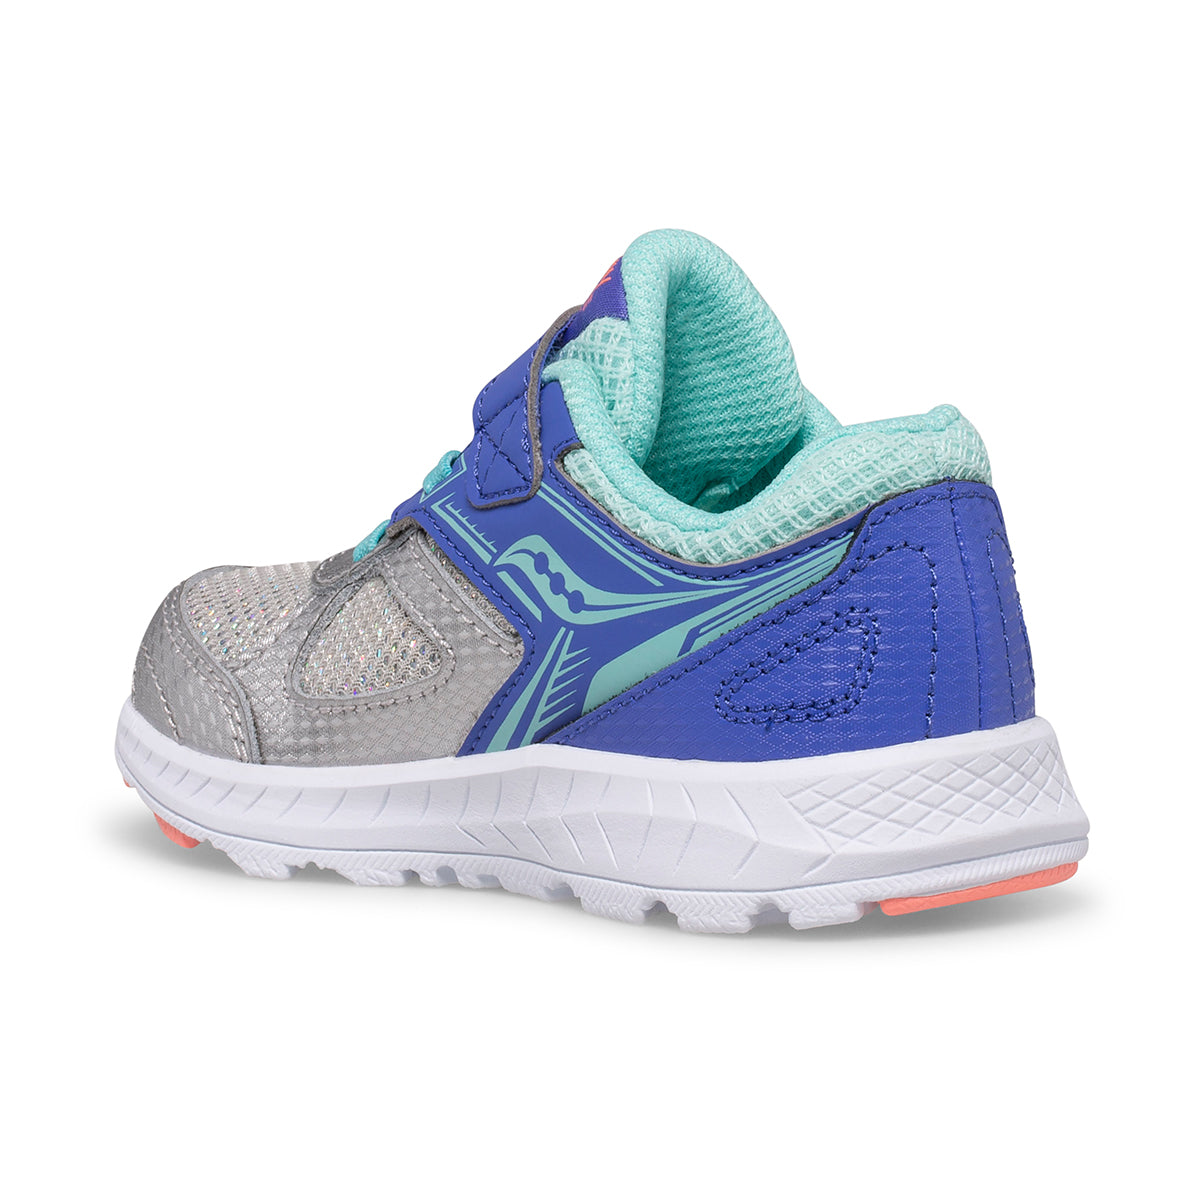 cohesion-14-ac-jr-sneaker-littlekid__Silver/Periwinkle/Turquoise_2